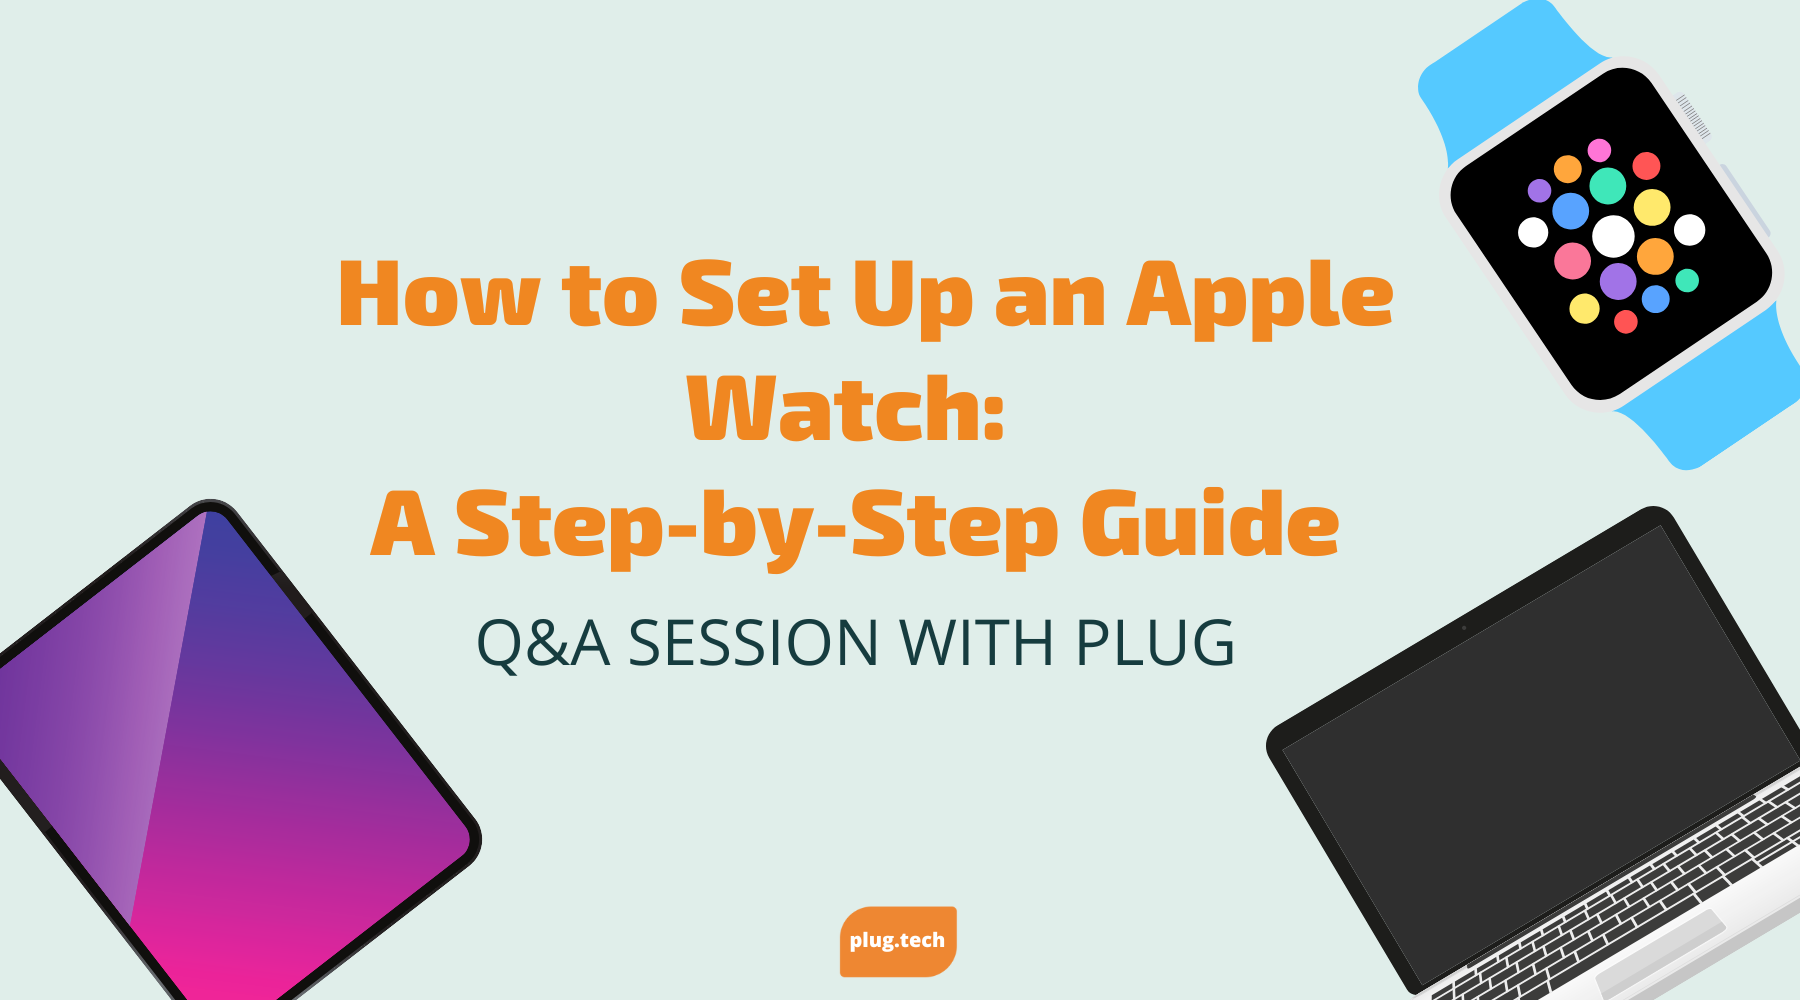 How to Set Up an Apple Watch: A Step-by-Step Guide